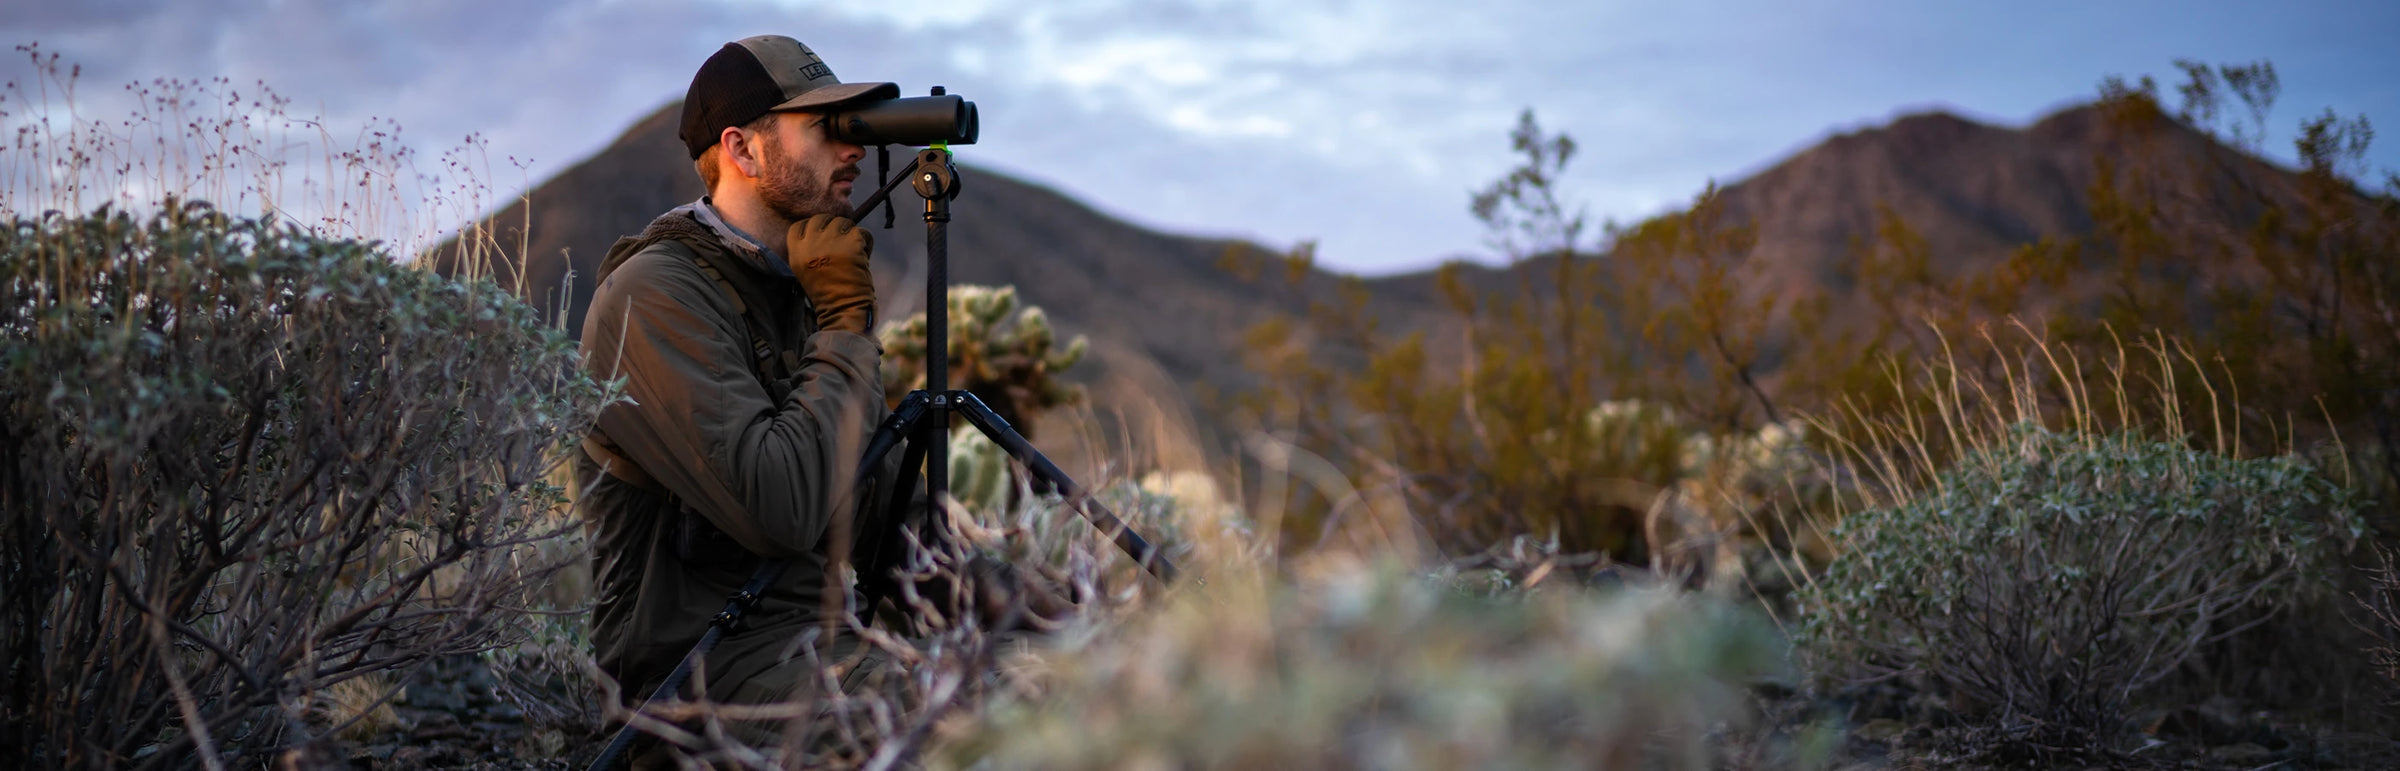 Outdoorsmans Tripods and Optics Accessories